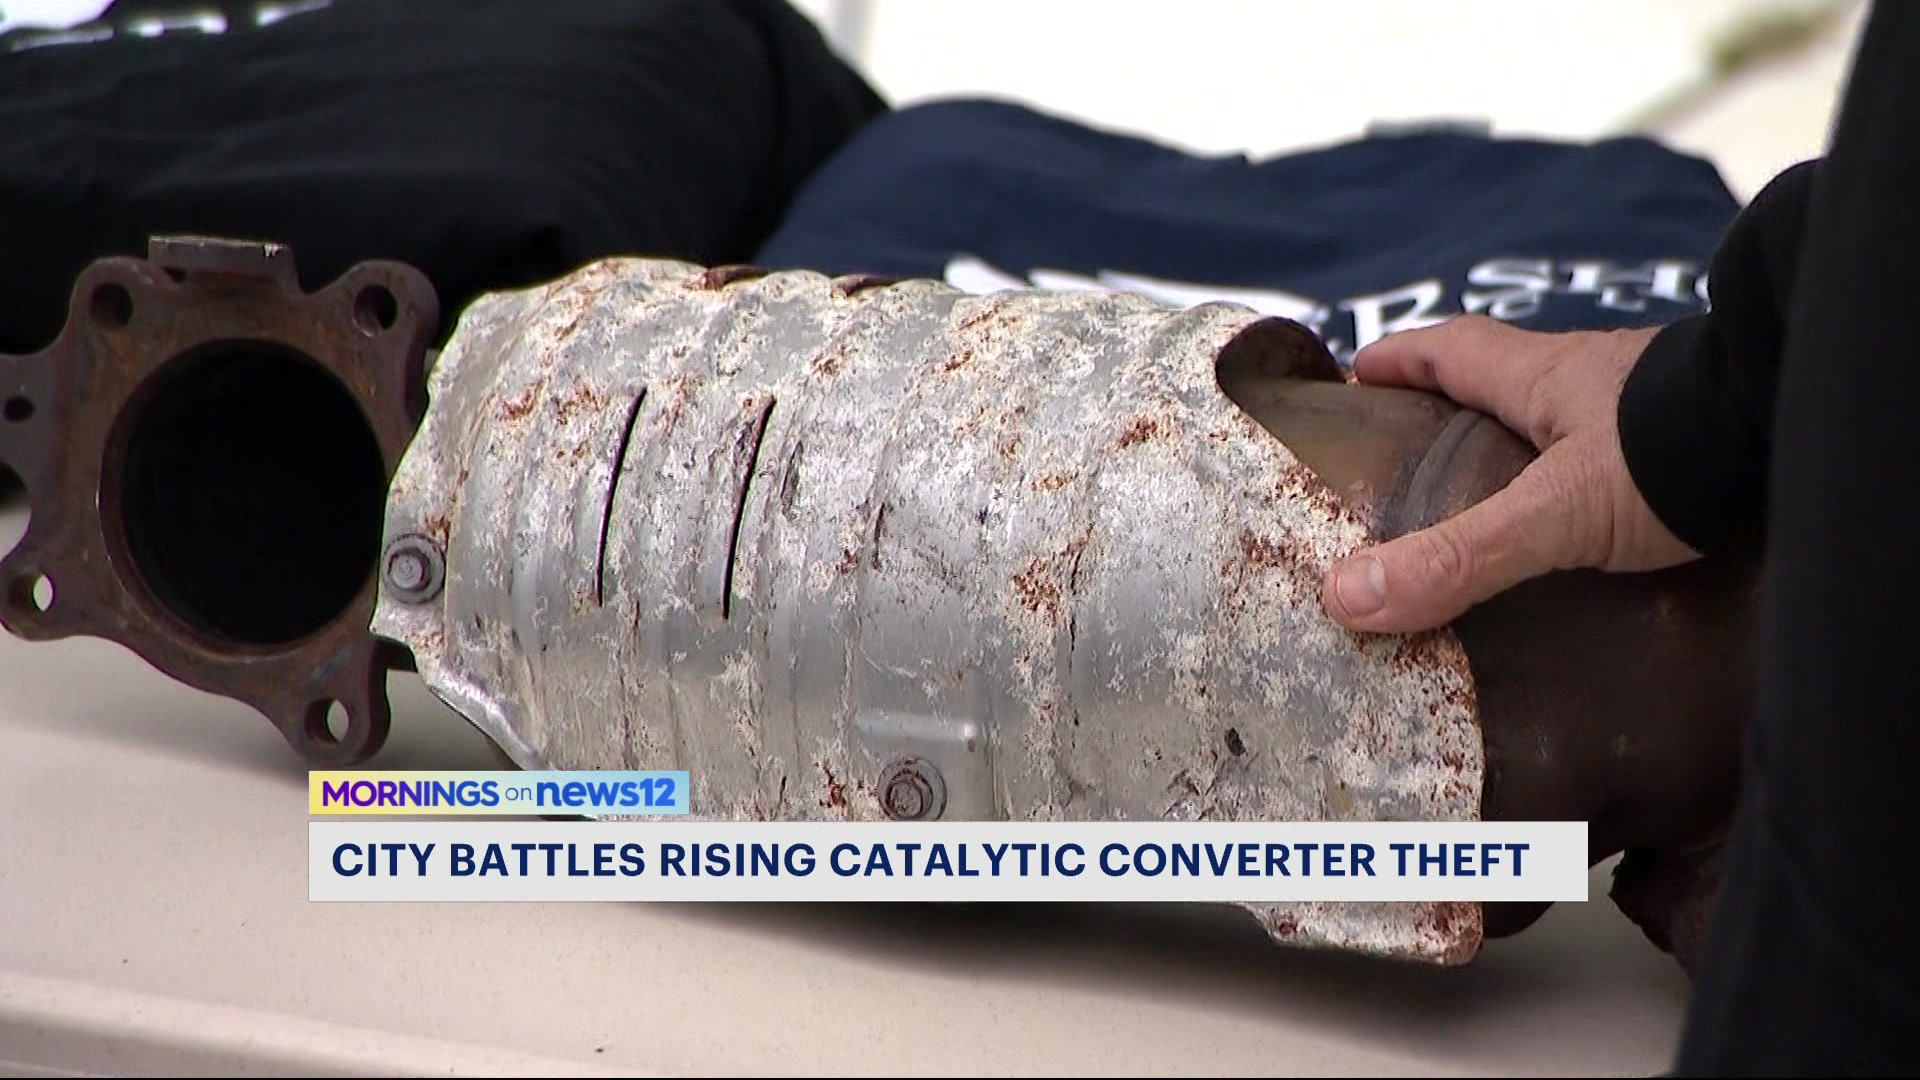 Nypd Bronx Officials Host Catalytic Converter Educational Event At Orchard Beach